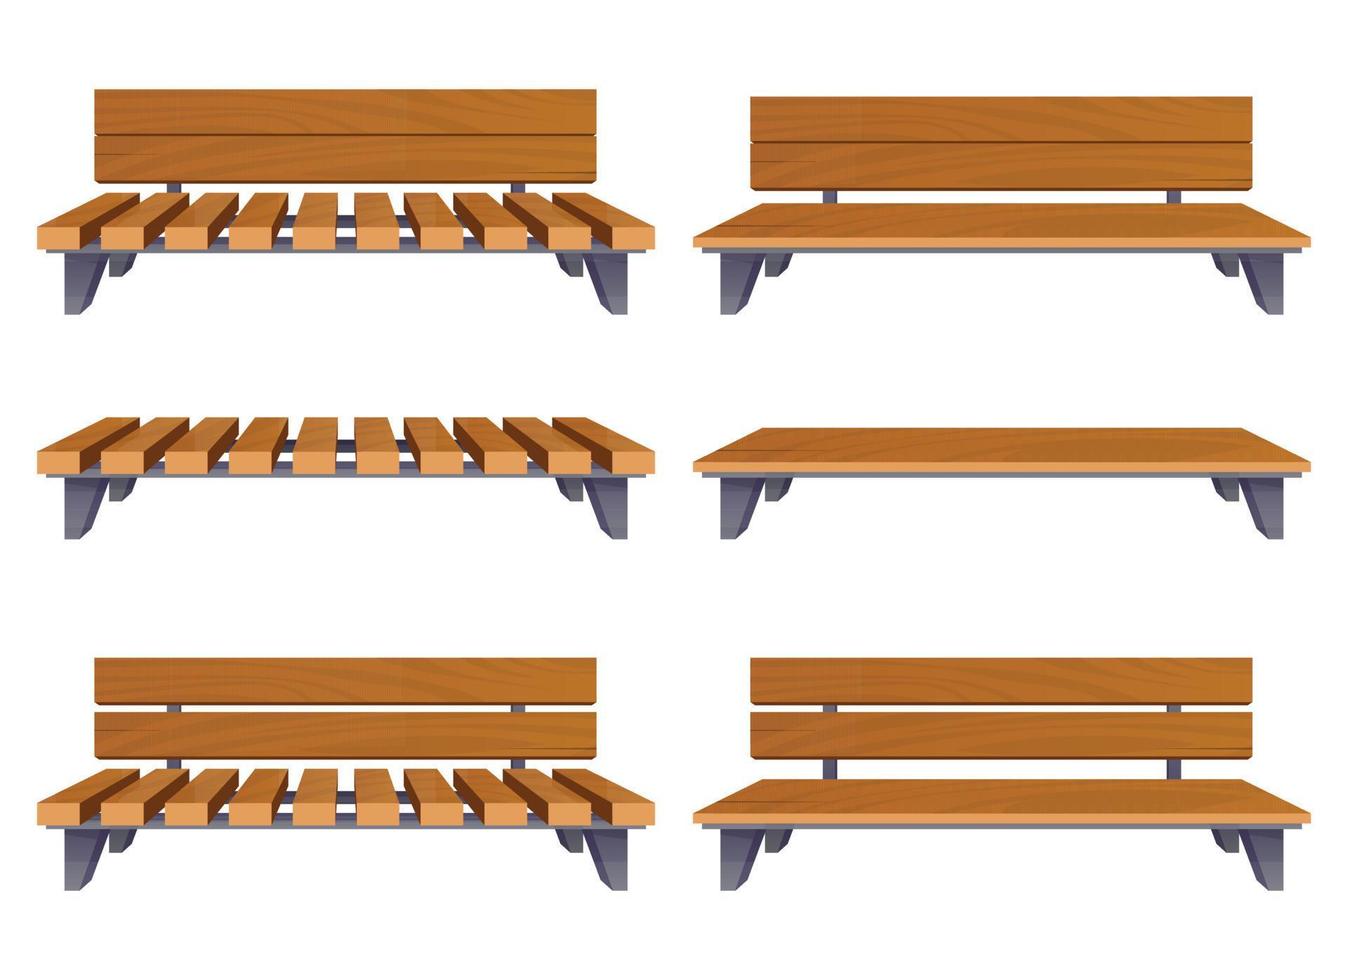 Park bench collection in cartoon style vector illustration isolated on white